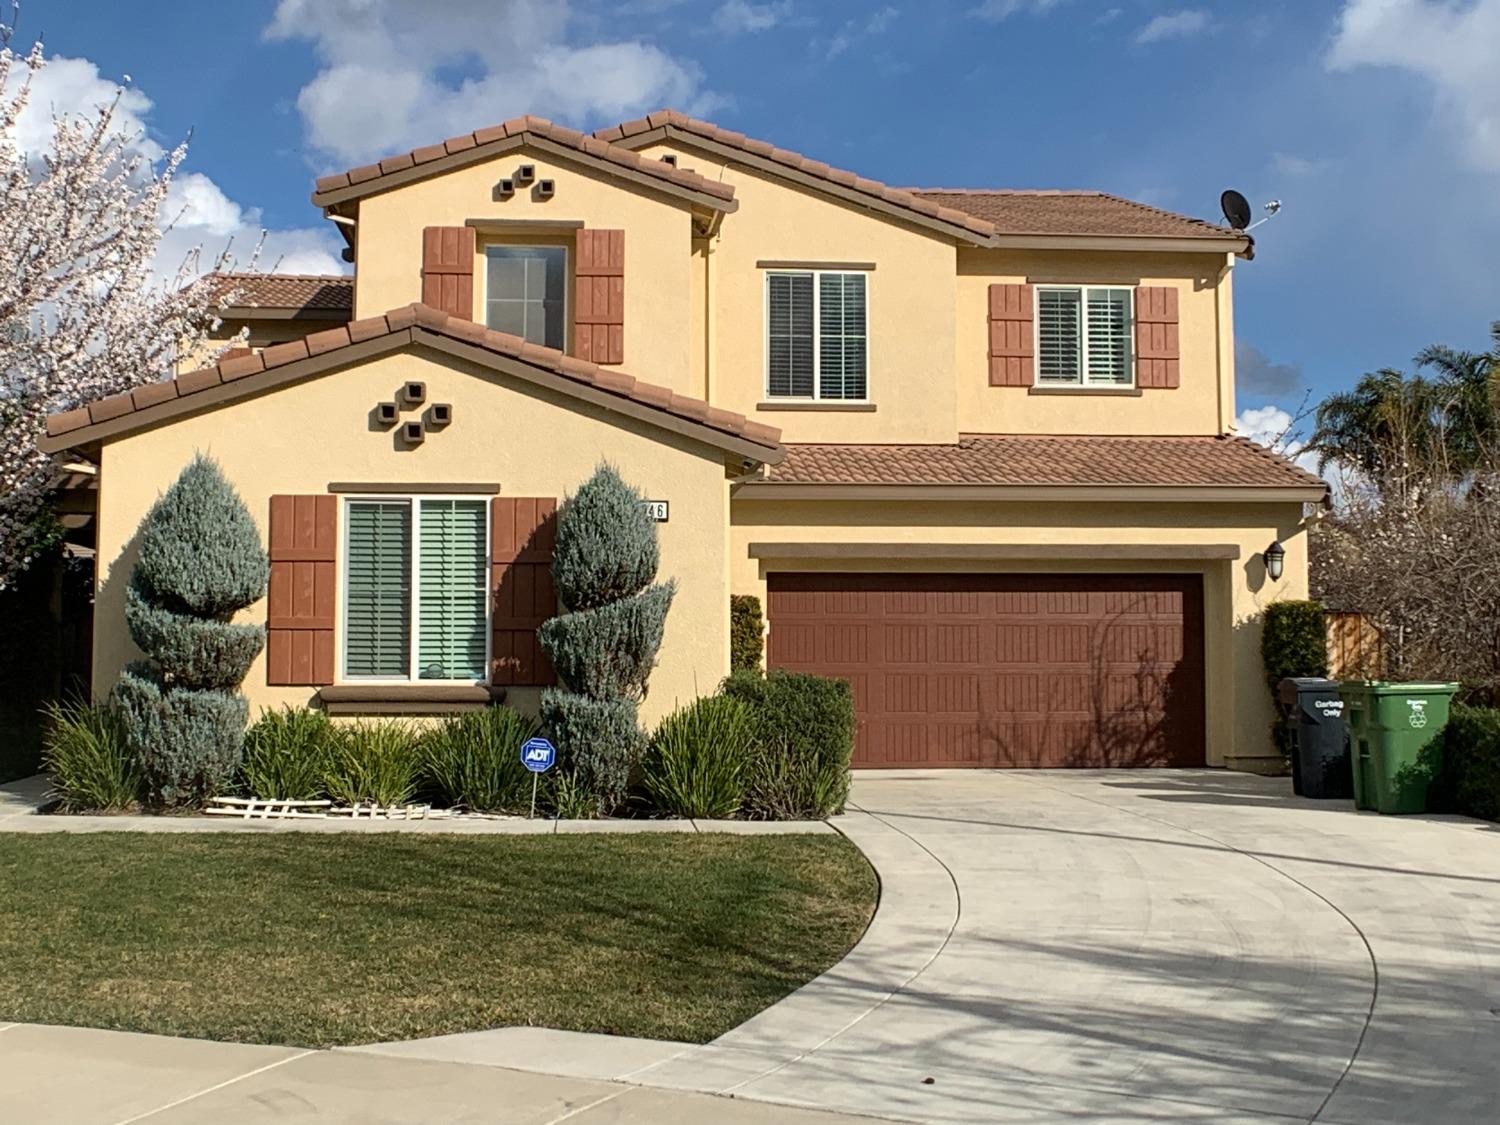 Photo of 2046 Alhambra Ct in Tracy, CA